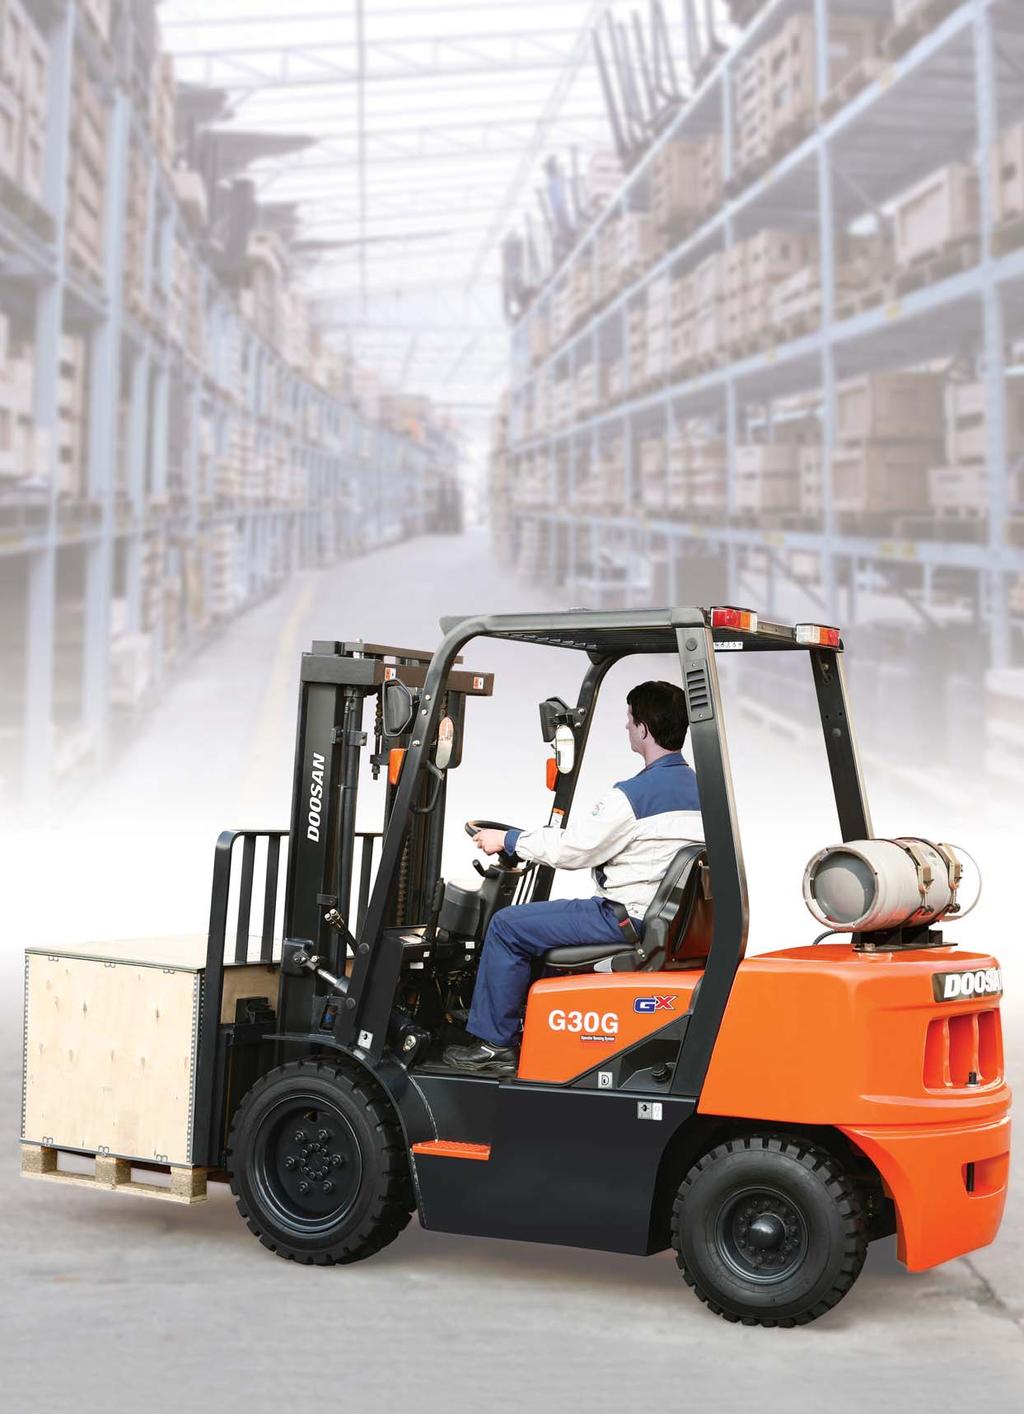 Proven Quality, Responsive Service and A Reliable Partner... After sales servicing of Doosan forklifts is available from both the selling dealership and Doosan s own customer service center.